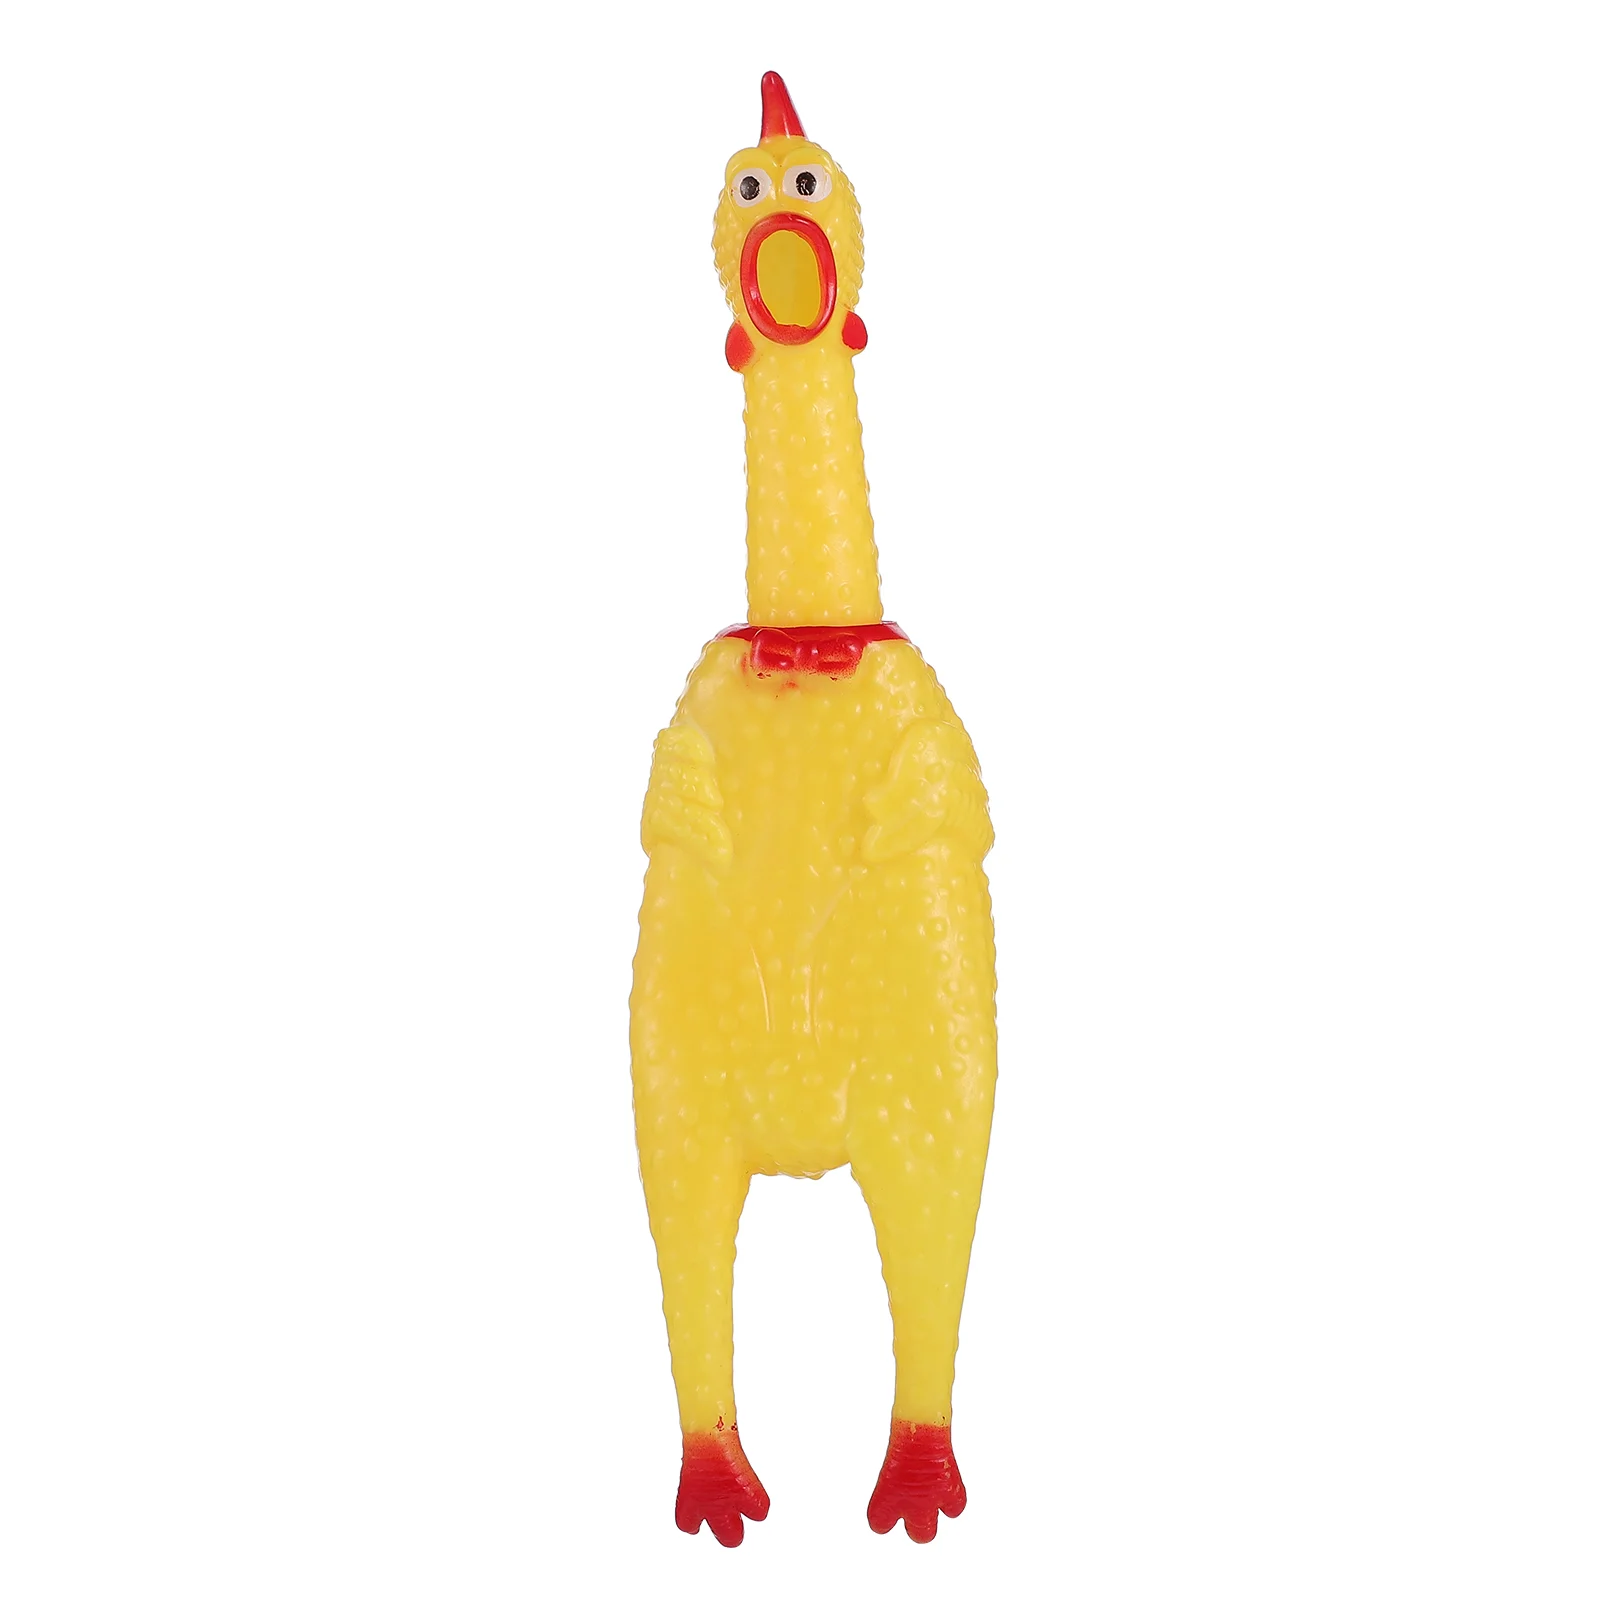 

Party Favor Bouncy Toy Rubber Squeez Chicken Squeaky Toys Yellow Stuffed Animals Prank Pooter Novelty